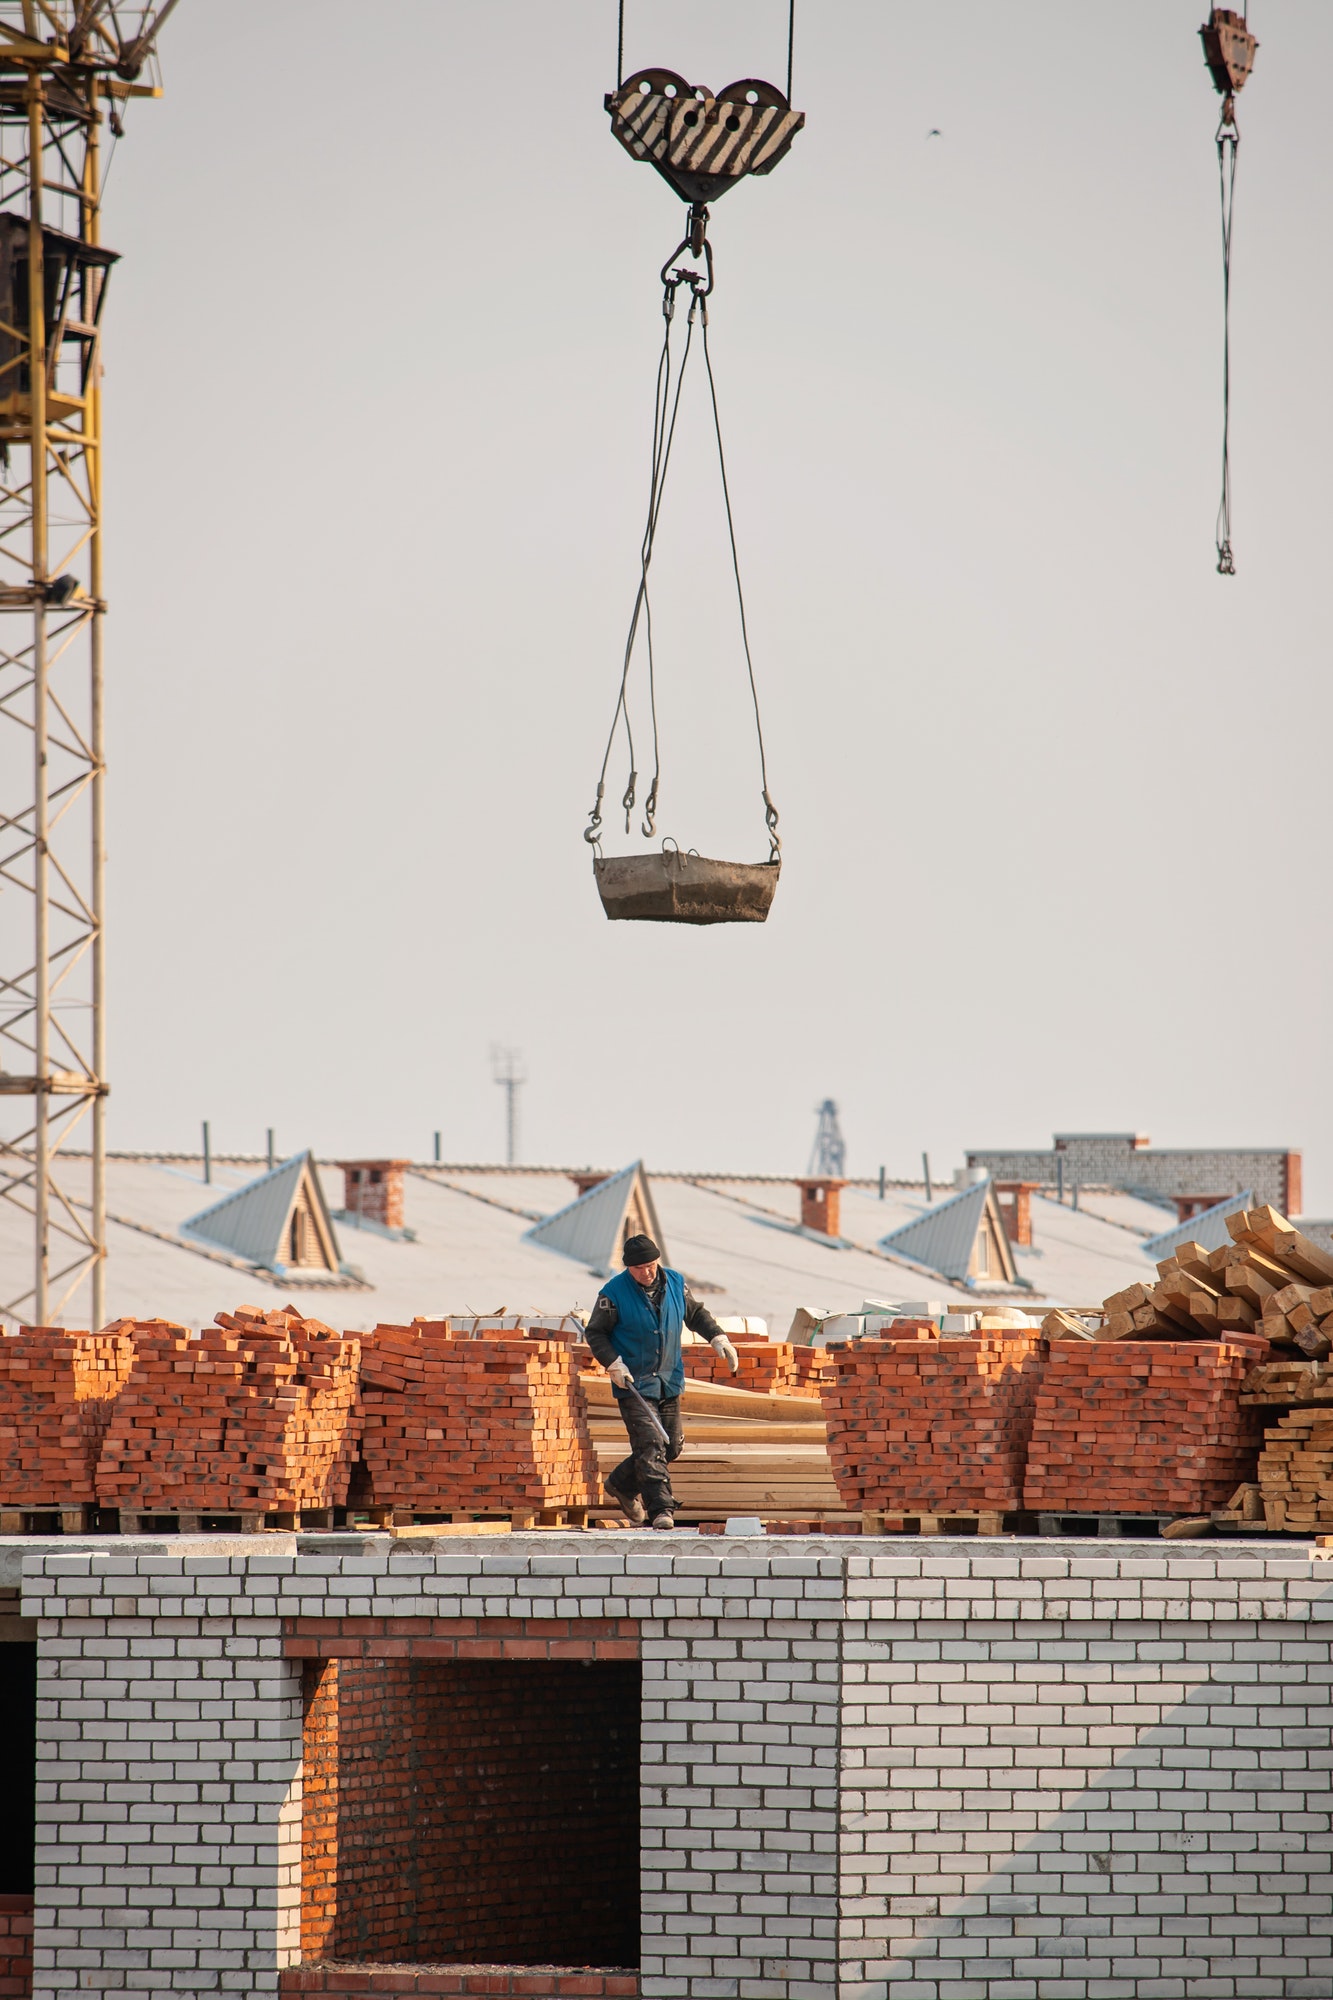 Construction. A man builder walks on the roof of a brick building under construction next to a crane